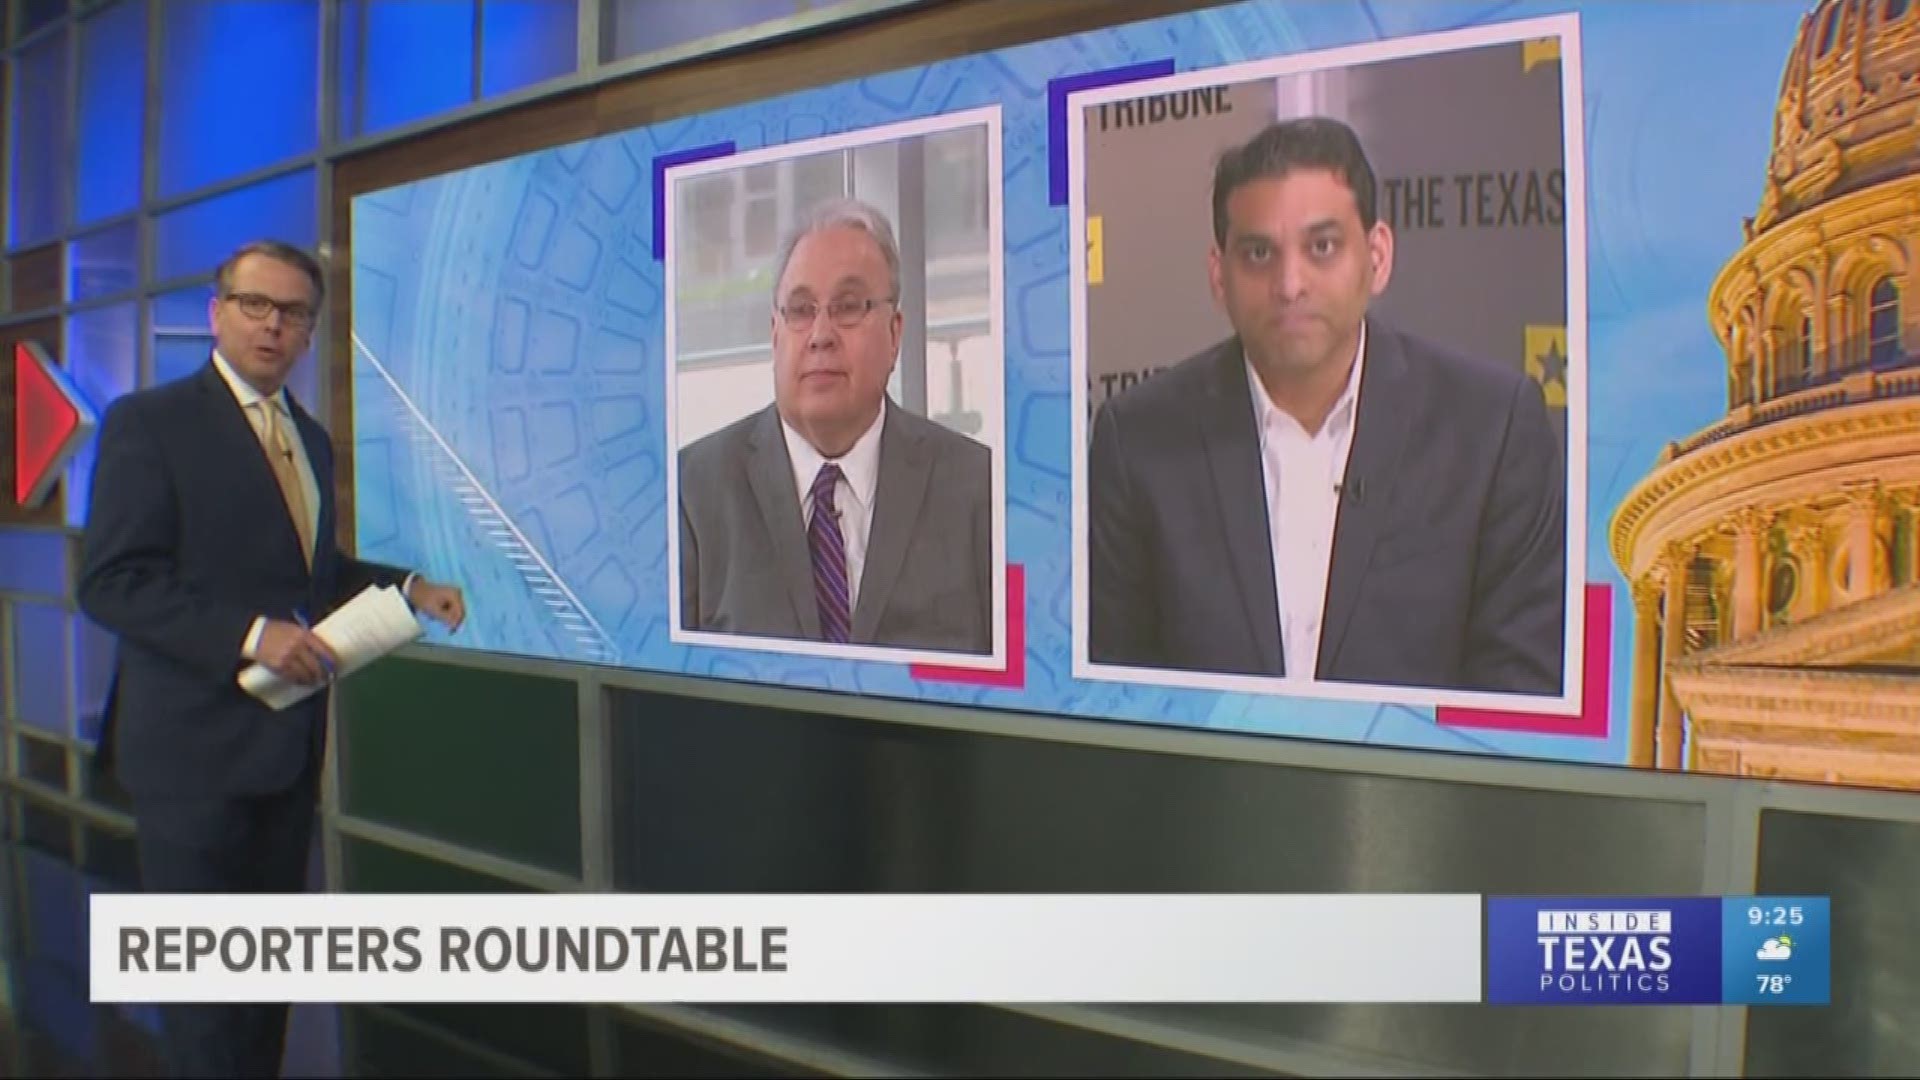 Reporters Roundtable puts the headlines in perspective each week.